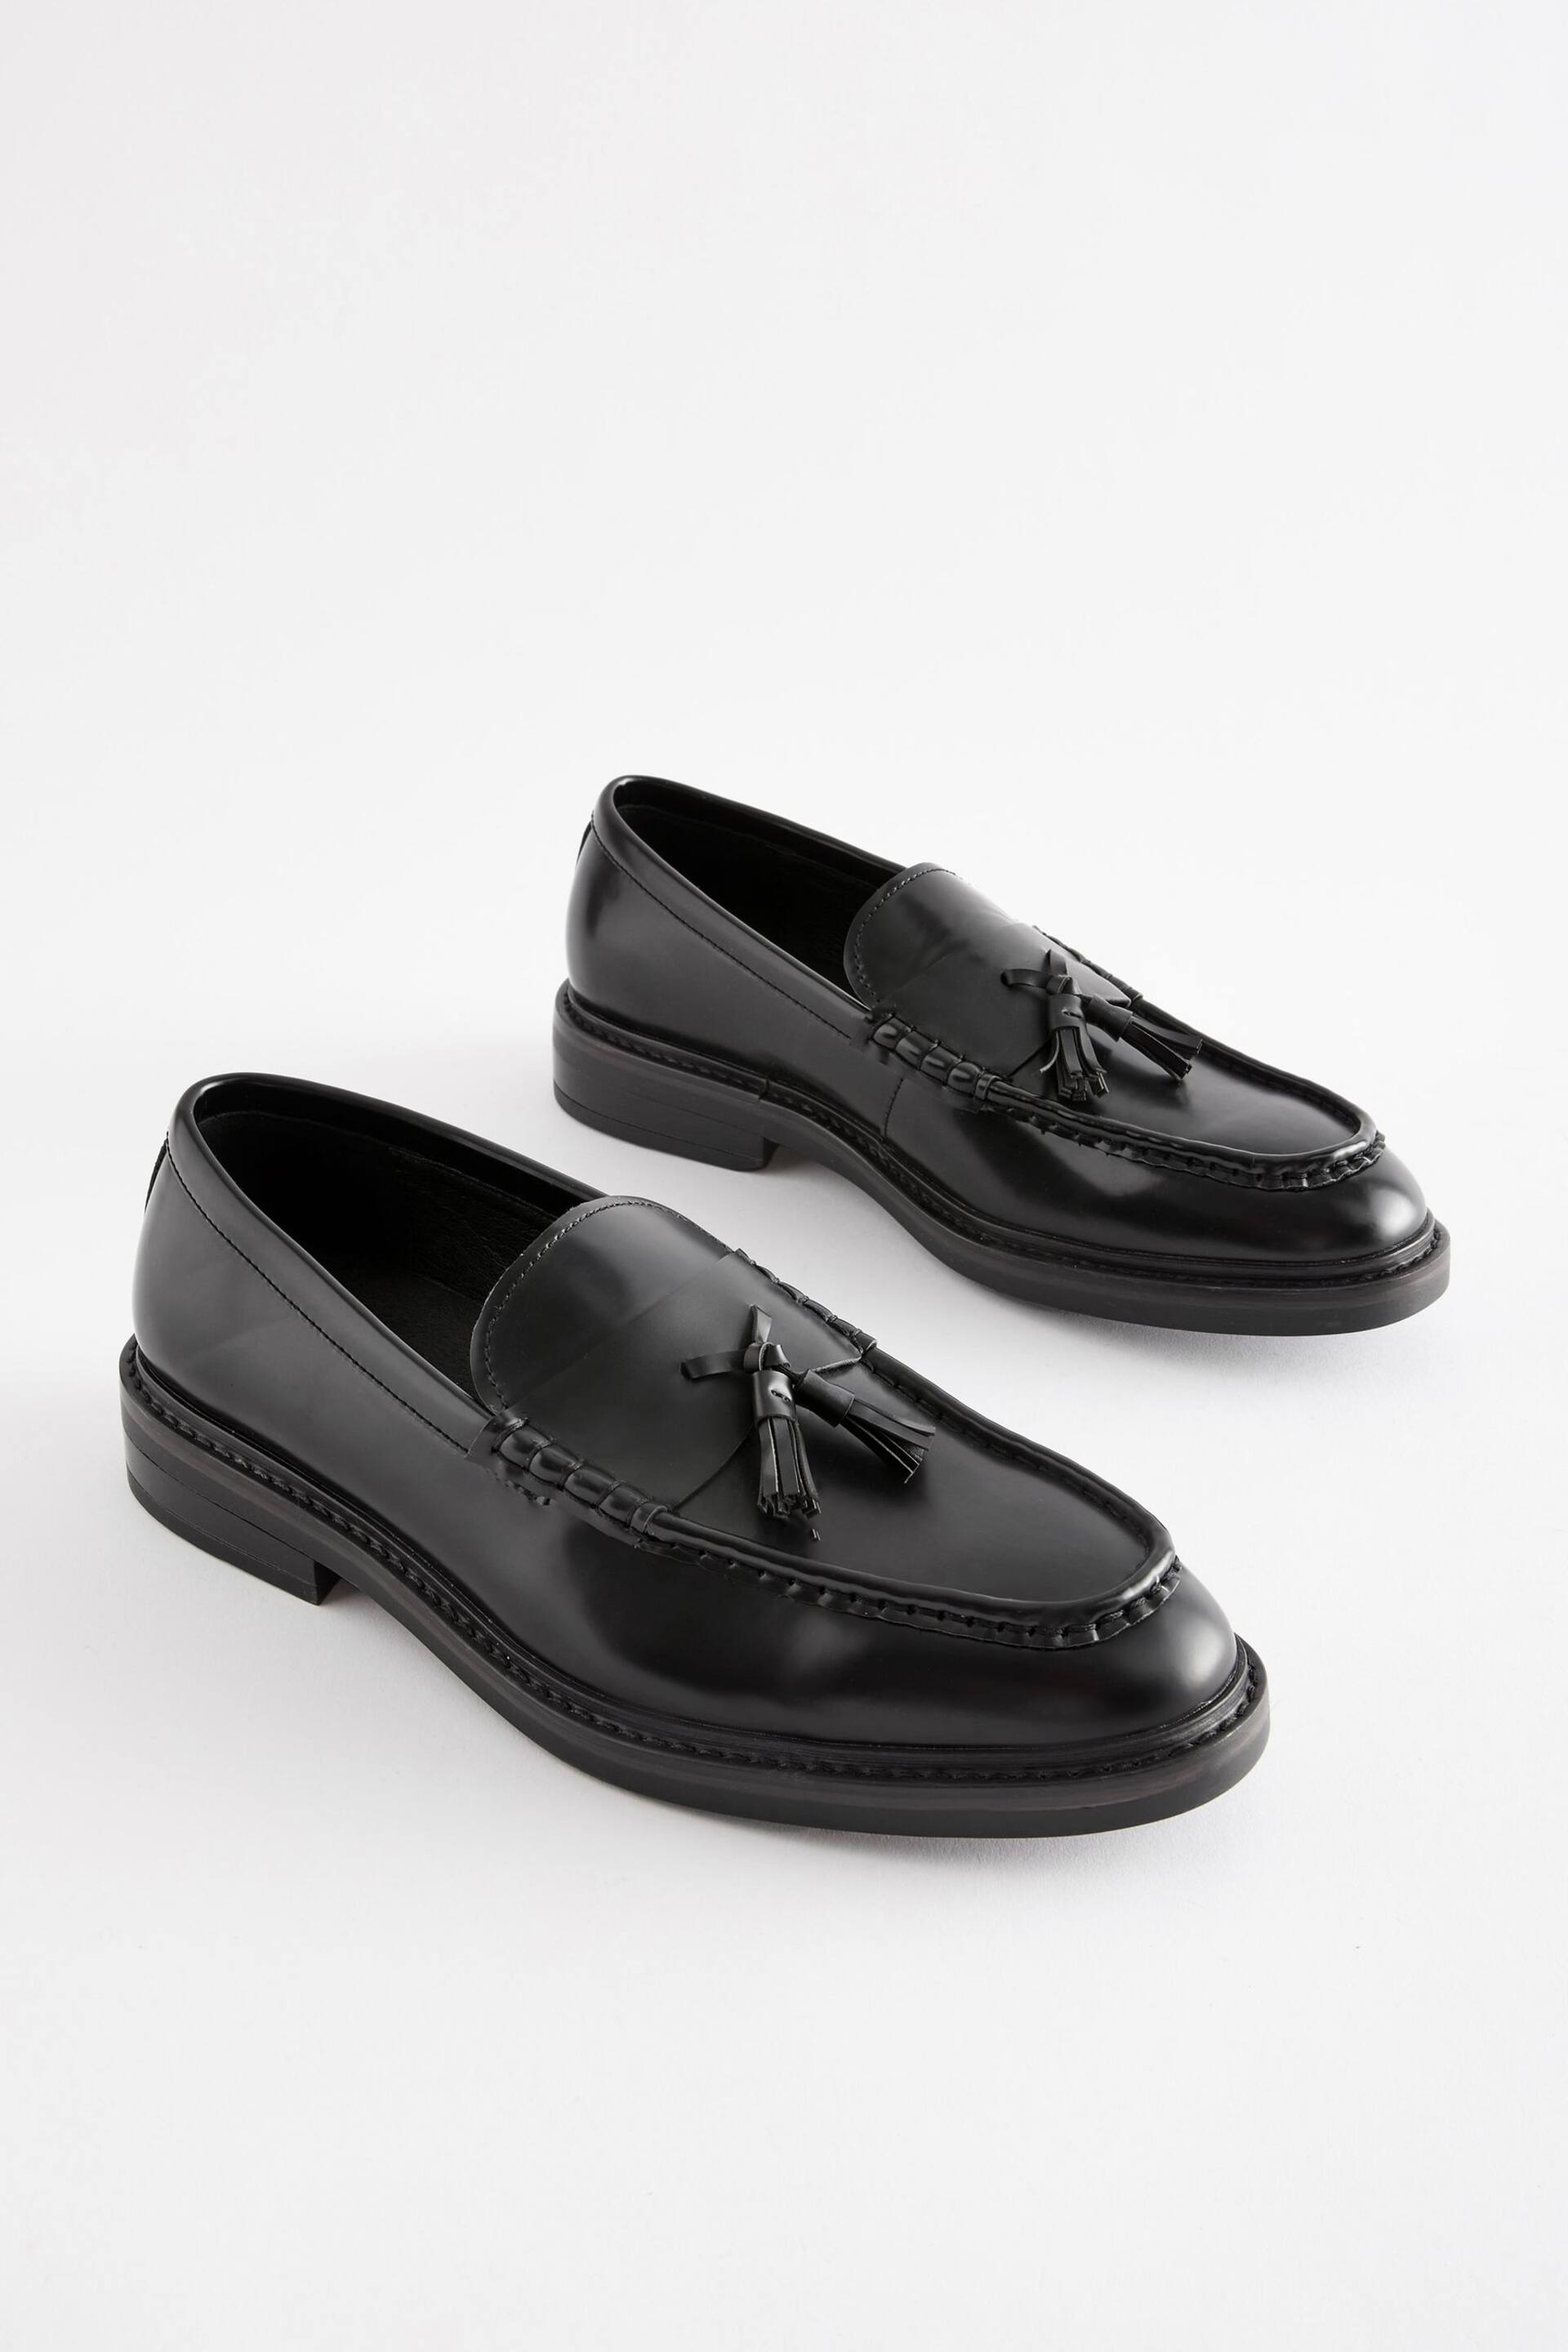 Black Chunky Tassel Loafers - Image 3 of 6